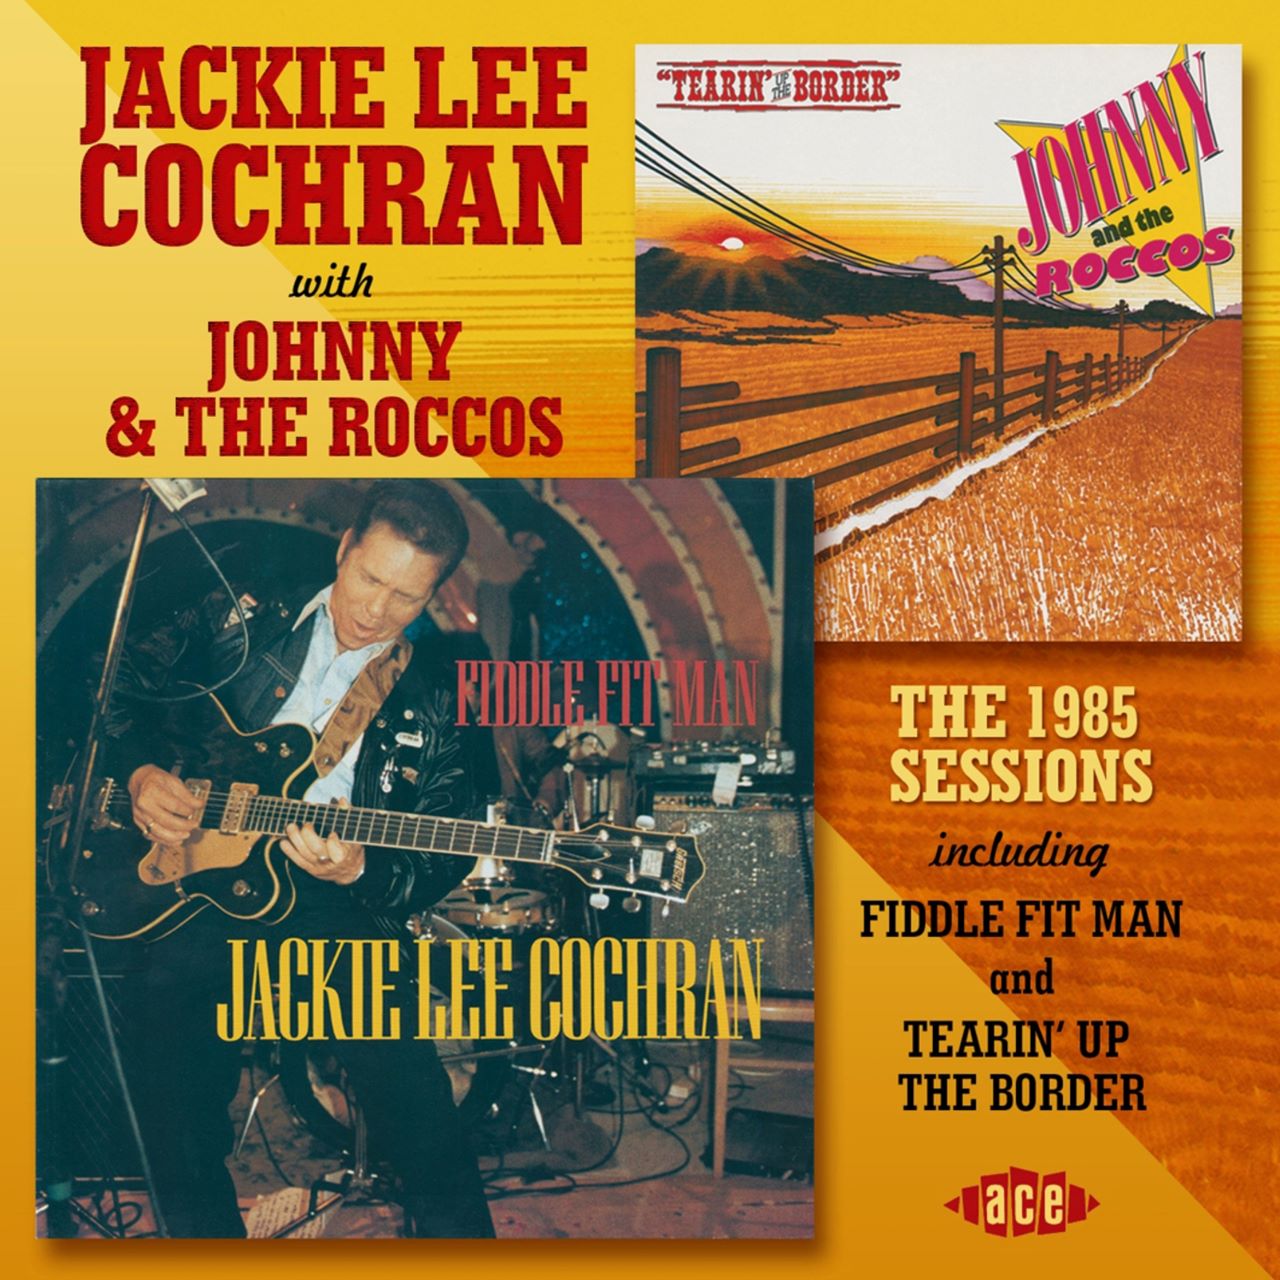 Jackie Lee Cochran - The 1985 Sessions cover album